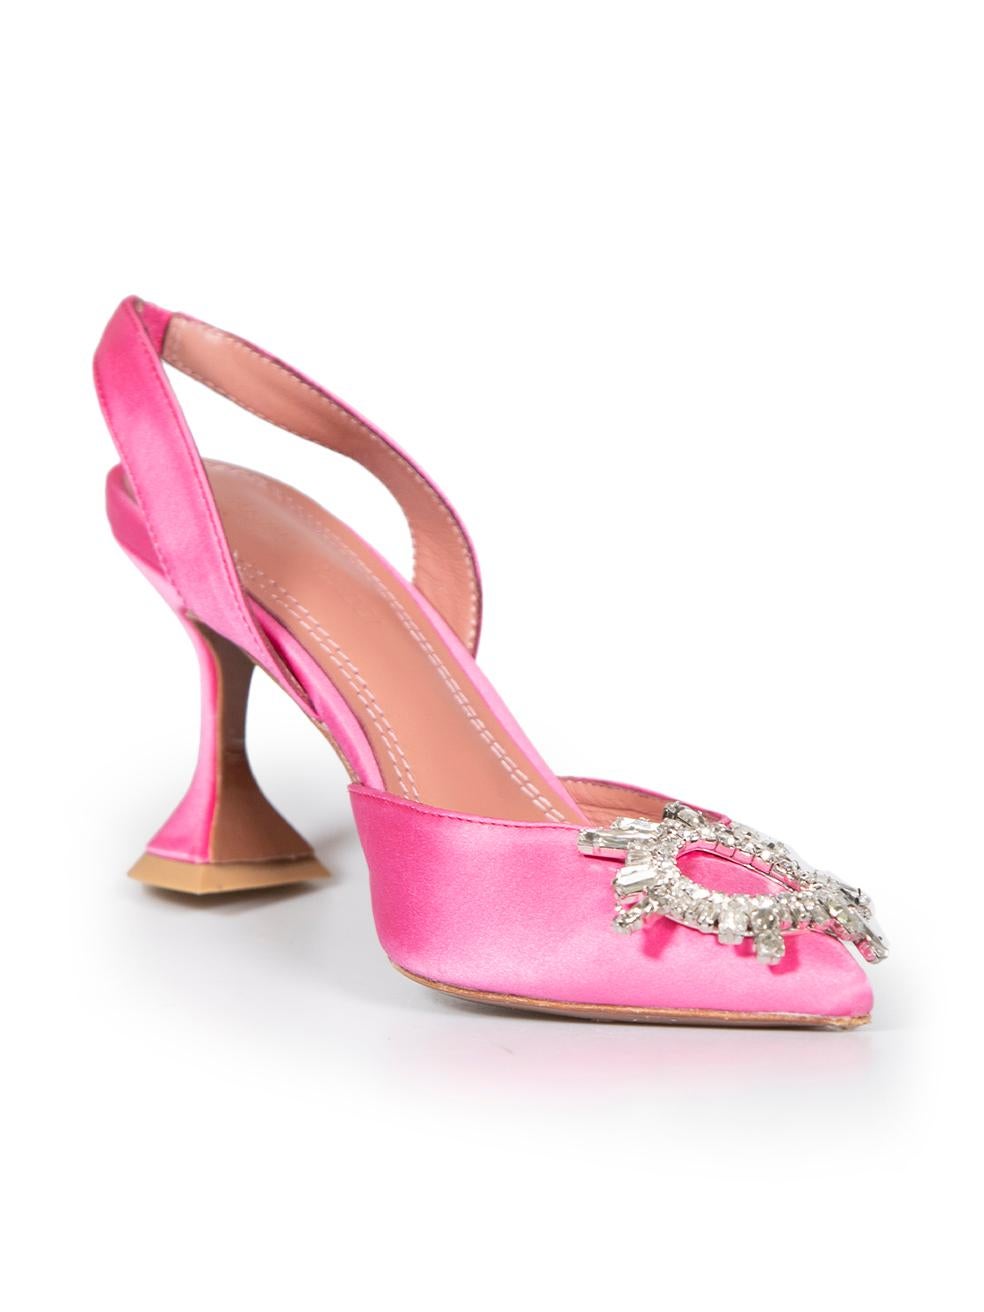 CONDITION is Good. Minor wear to heels is evident. Light marks and abrasions to the heels with some jewels missing from the embellishment on this used Amina Muaddi designer resale item.
 
 
 
 Details
 
 
 Model: Begum
 
 Pink
 
 Satin
 
 Heels
 
